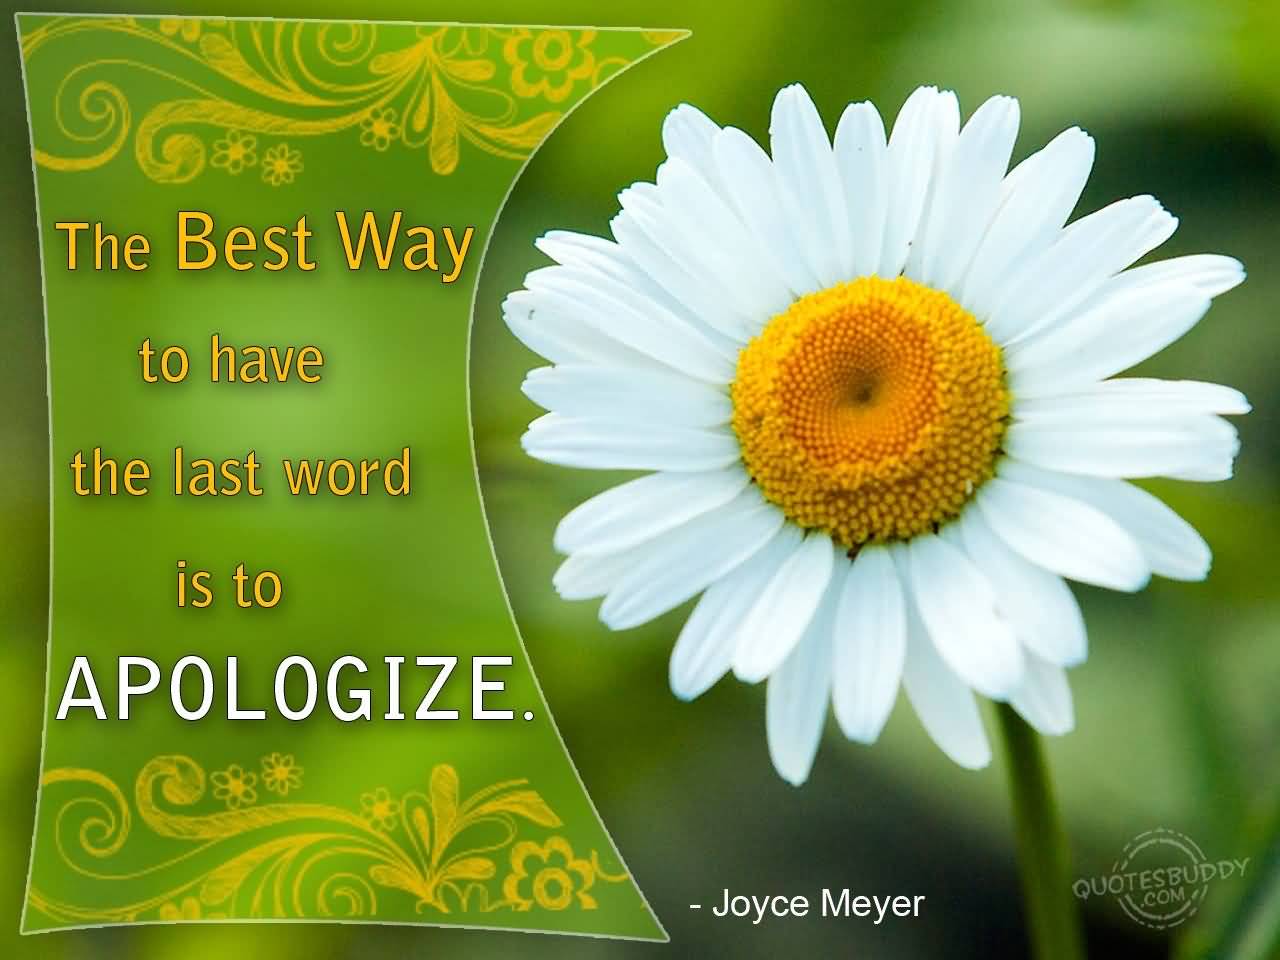 The best way to have the last word is to apologize.